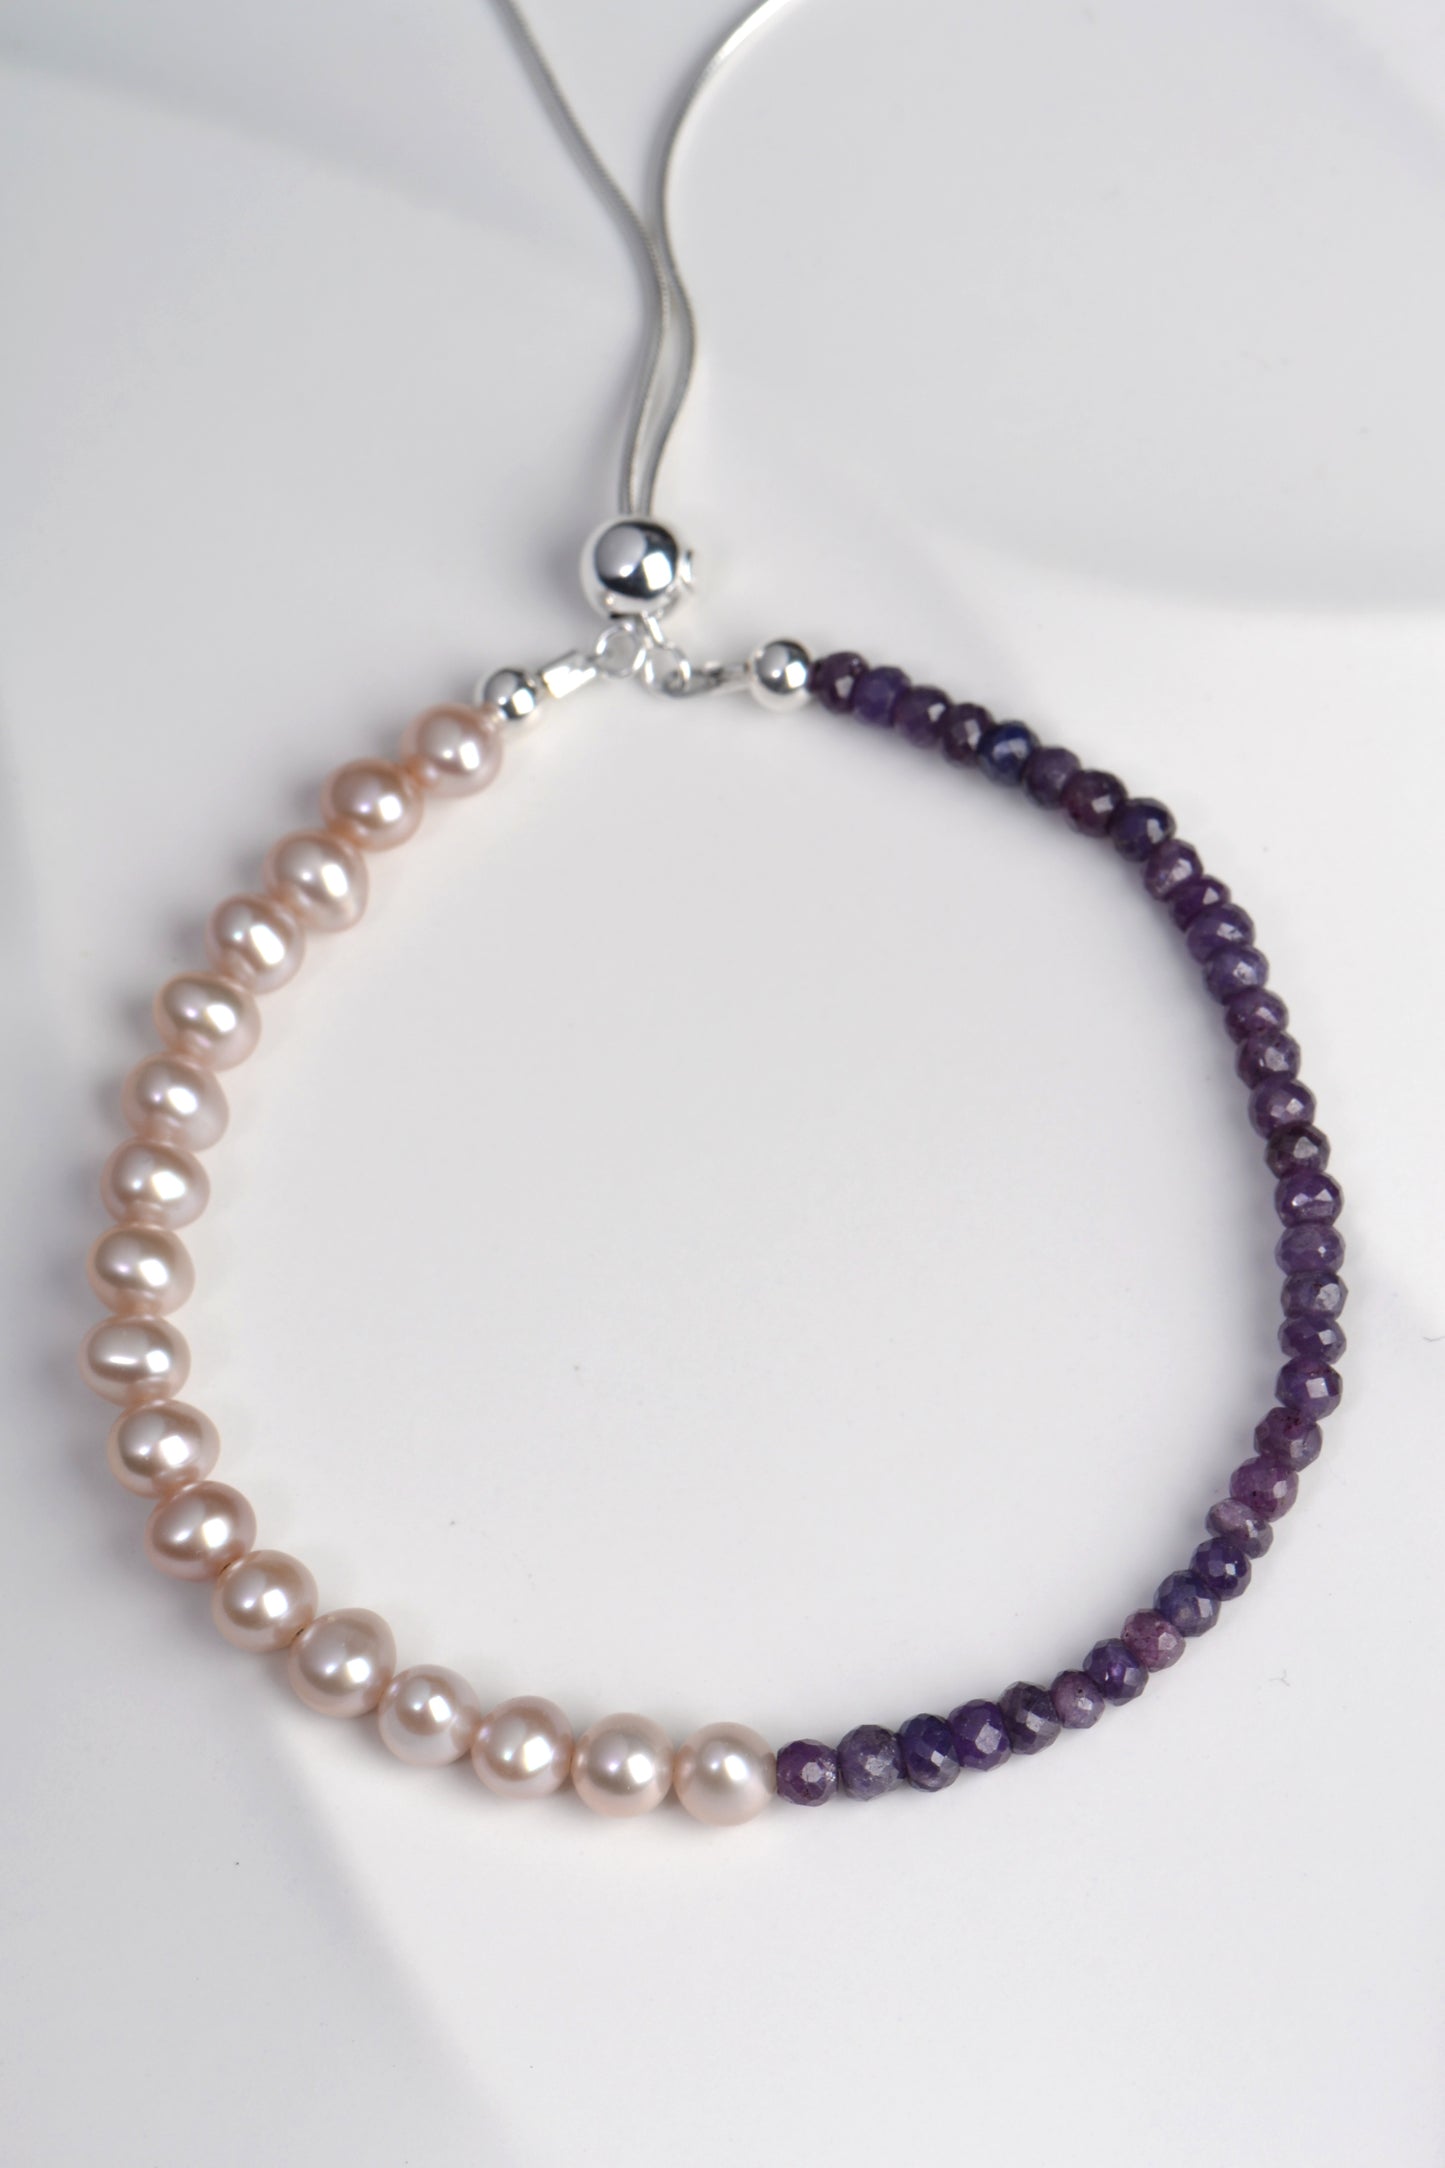 designer bracelet with half pale pink pearls and half purple sapphires with silver adjustable clasp